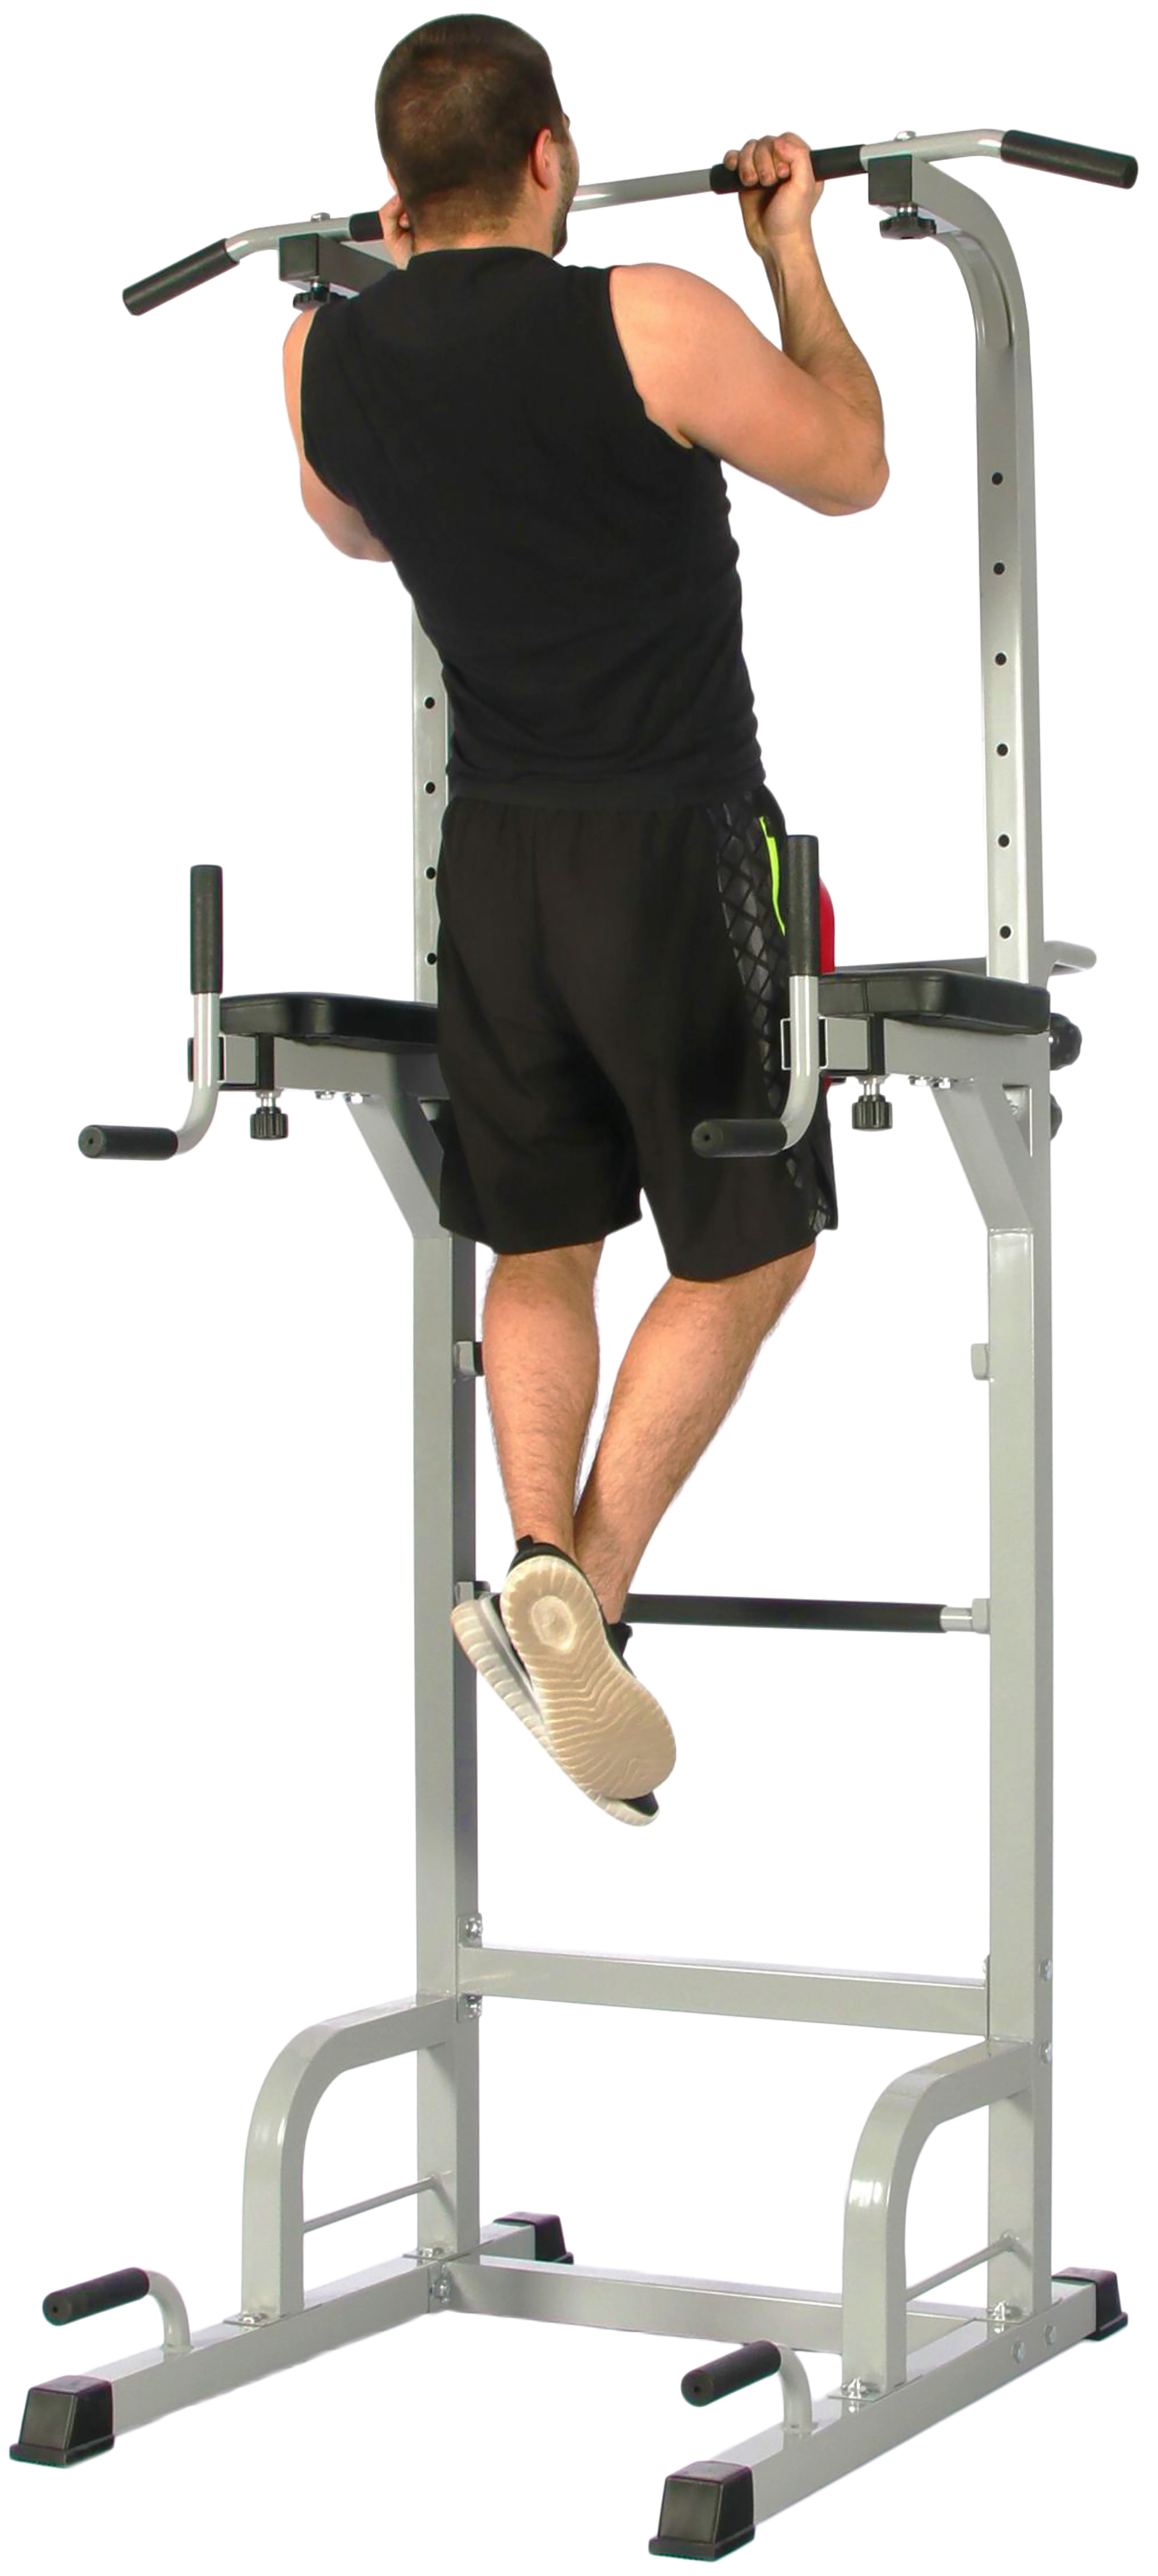 Everyday Essentials Power Tower with Push-up, Pull-up and Workout Dip Station for Home Gym Strength Training - image 2 of 6